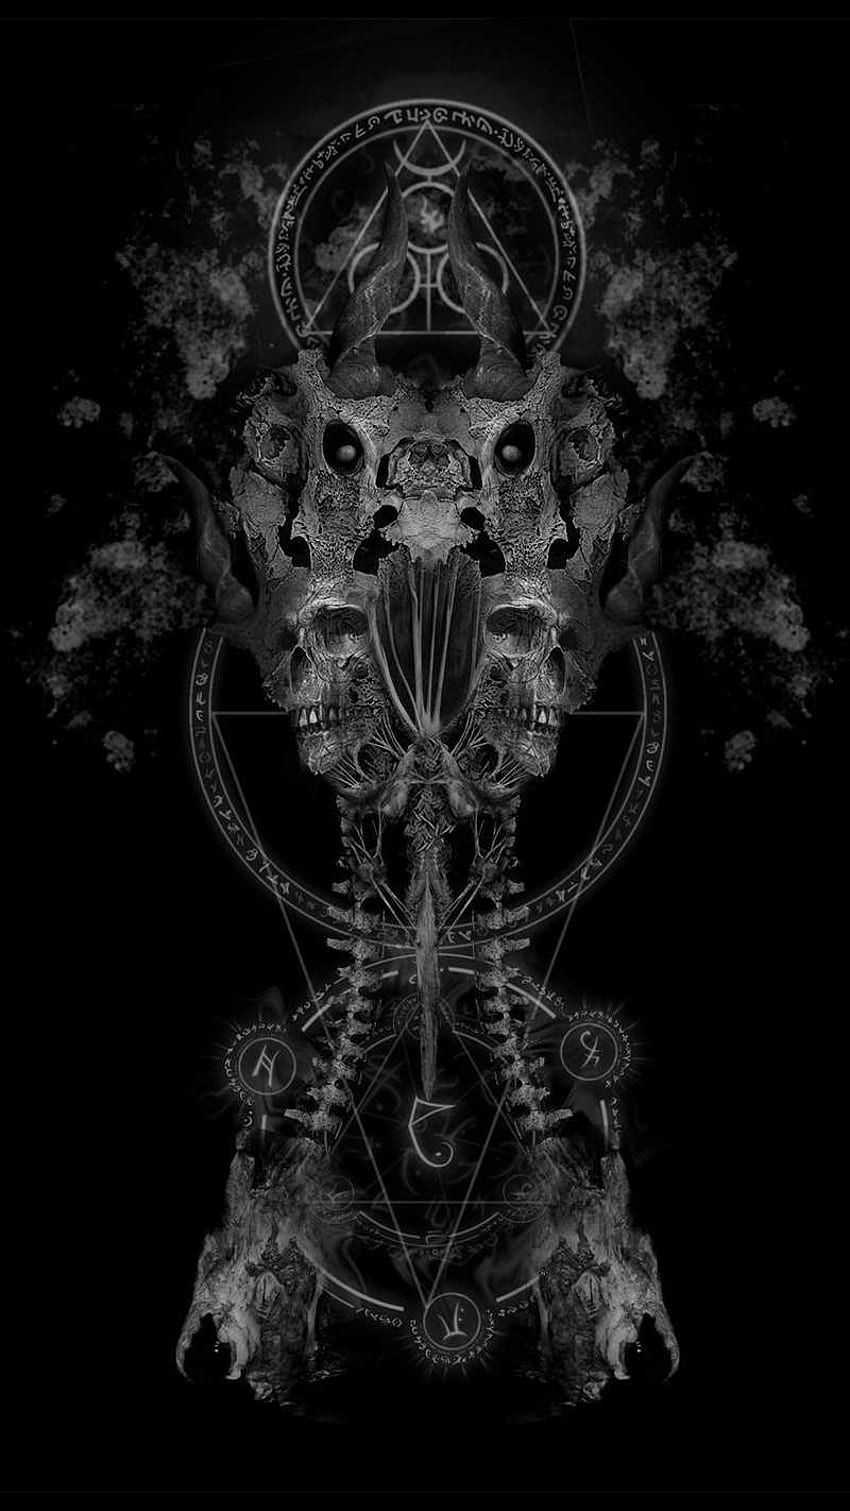 A dark and eerie digital illustration of a skull with horns and tentacles. - Gothic, emo